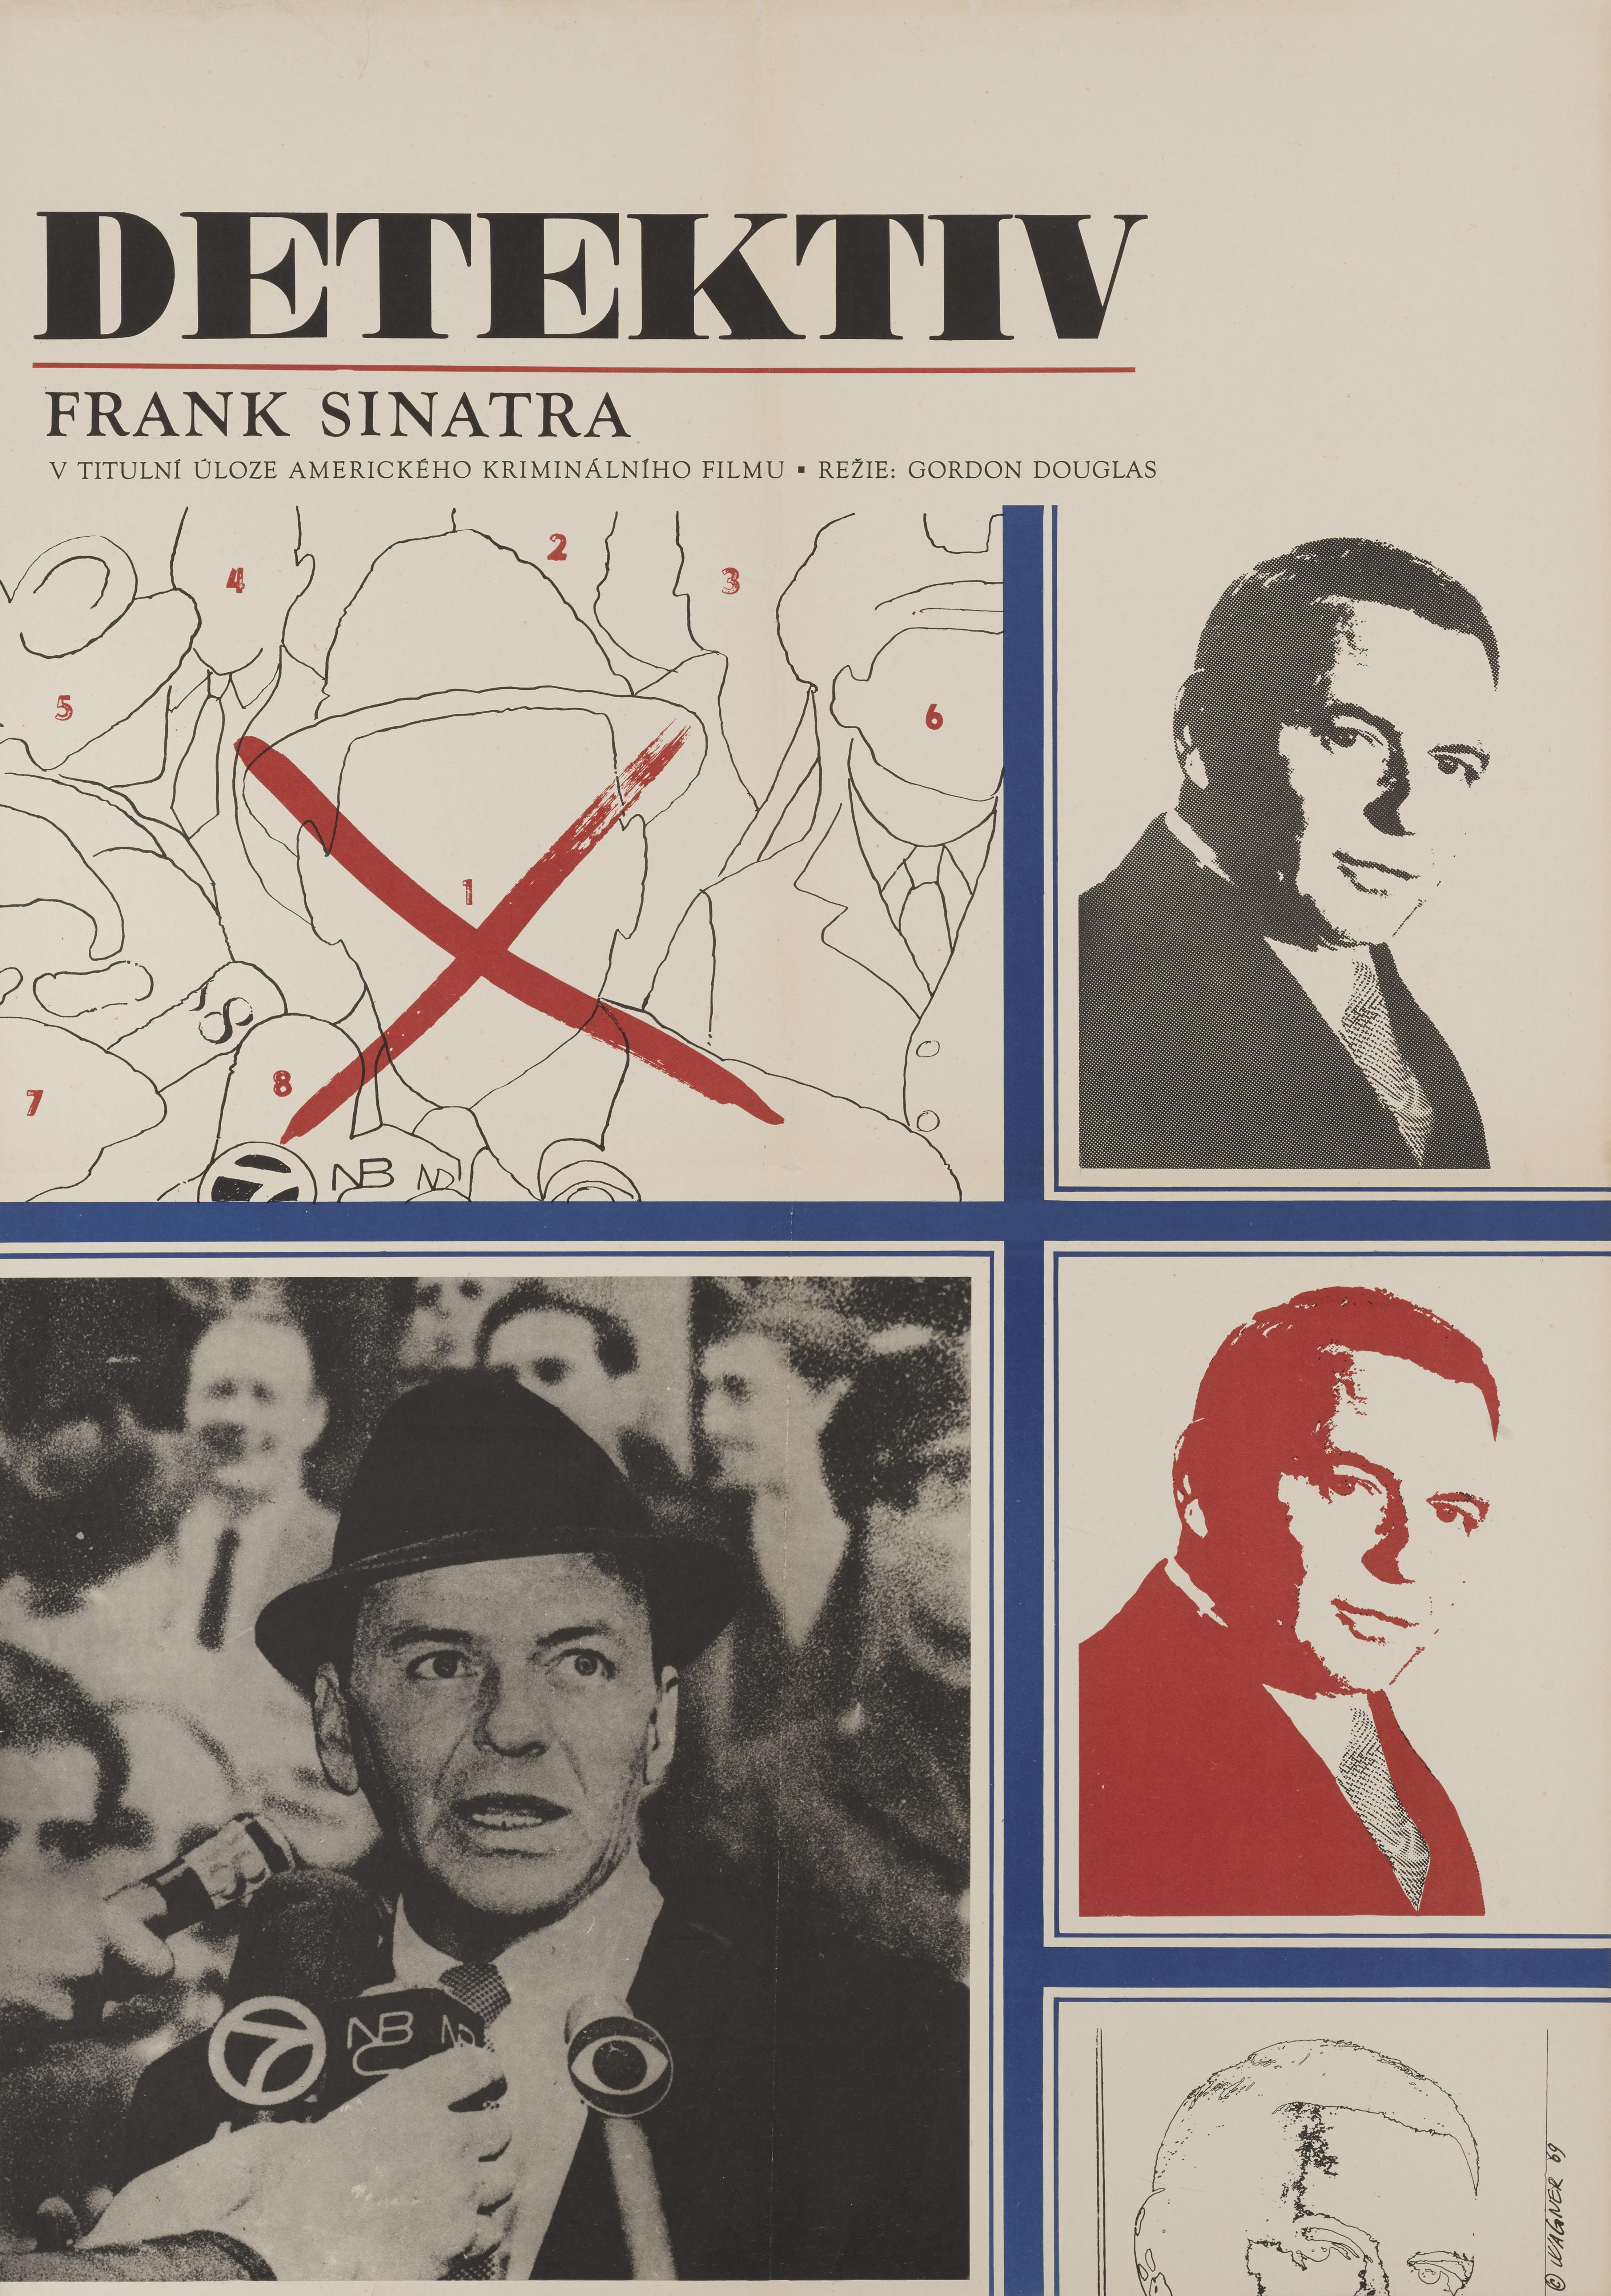 Original Czechoslovakian film poster for Gordon Douglas's 1969 thriller, starring Frank Sinatra.
This extremely cool poster was designed by the Czech artist Josef Wagner (1938)
This poster is from the films first Czech release in 1969
This poster